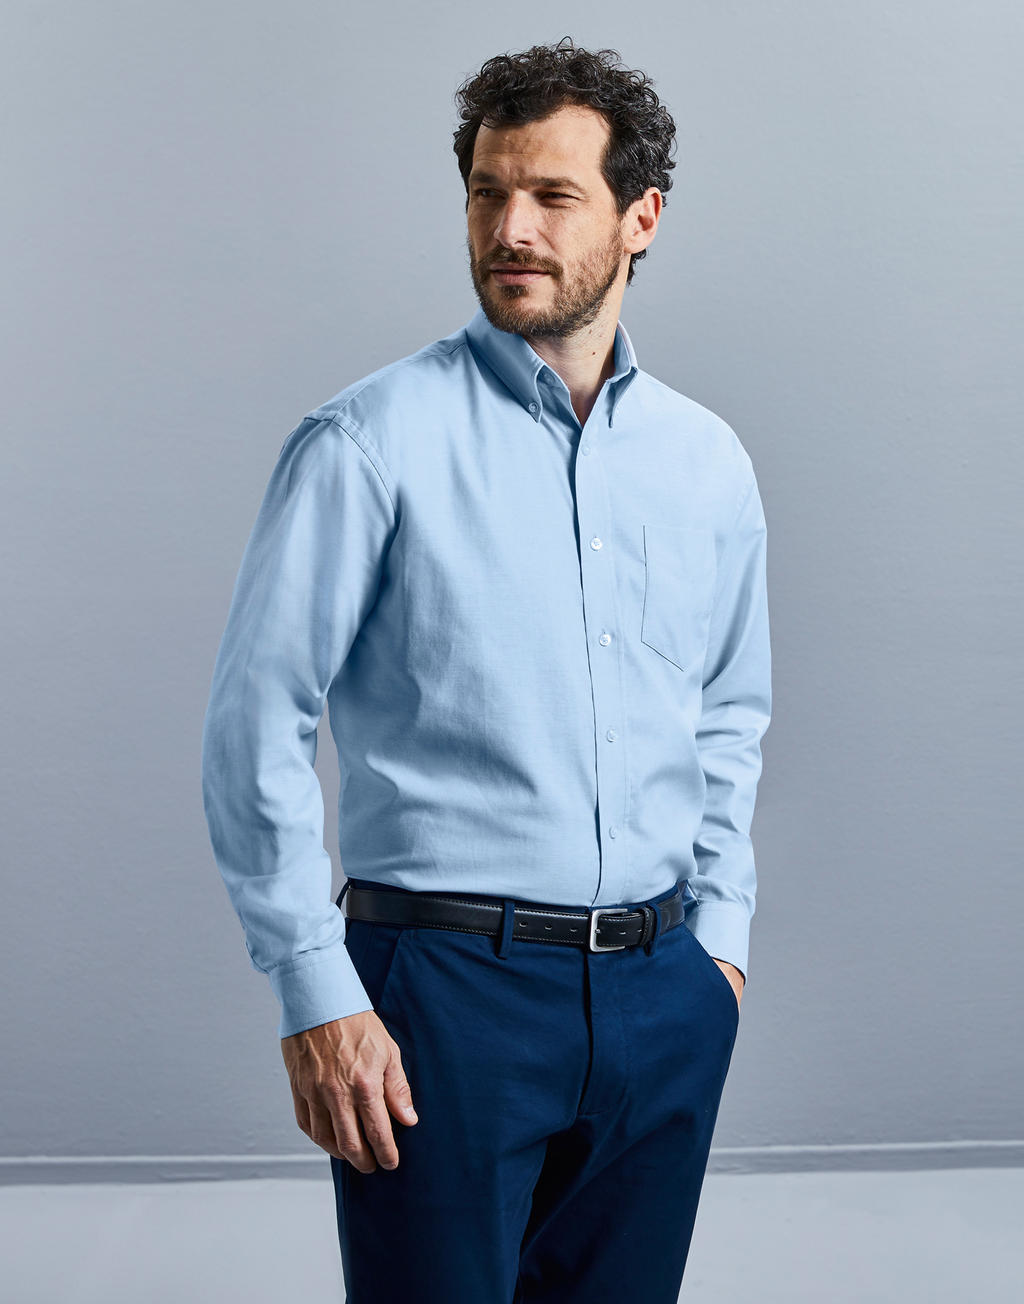  Oxford Shirt LS in Farbe White